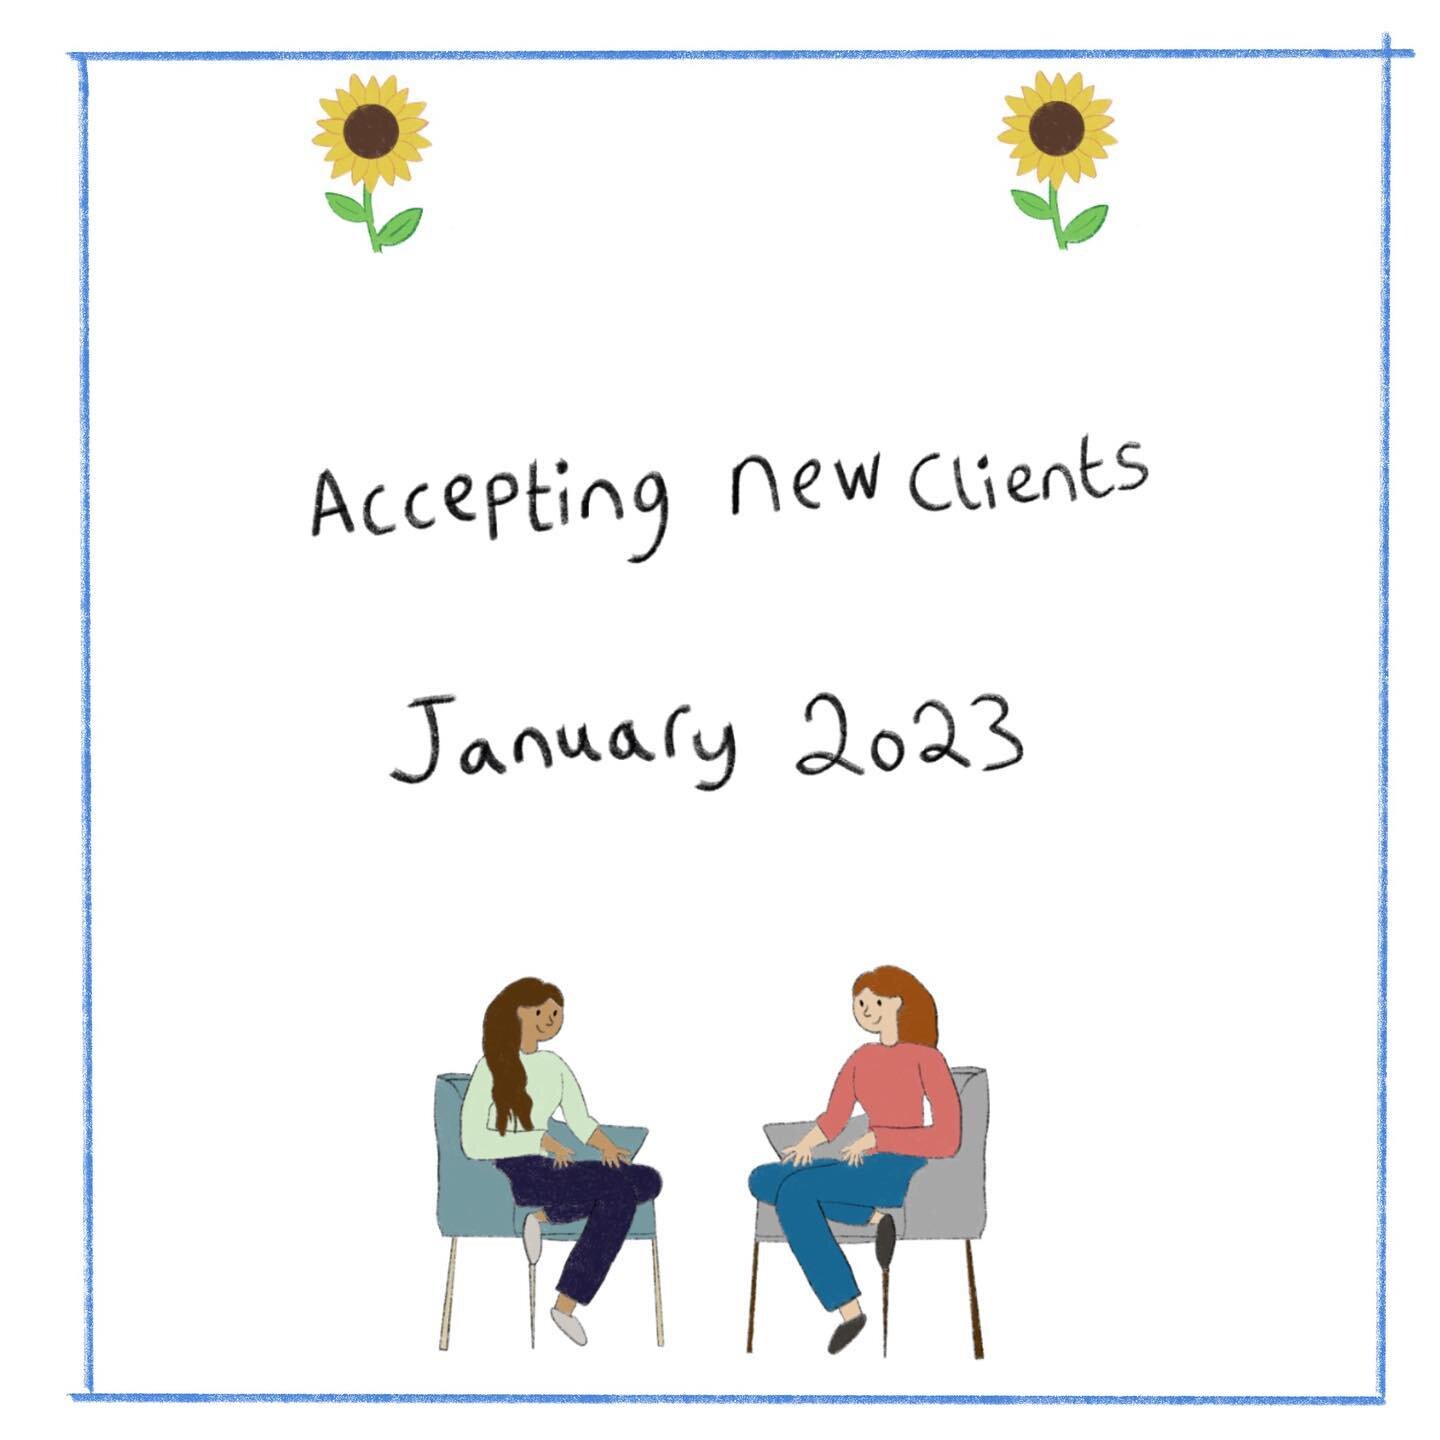 Therapy is a great resource to learn new skills, be held accountable, look at a situation from a new perspective and be accepted as your most authentic self. 

I have availability for 2/3 new clients starting this month for weekly psychotherapy sessi